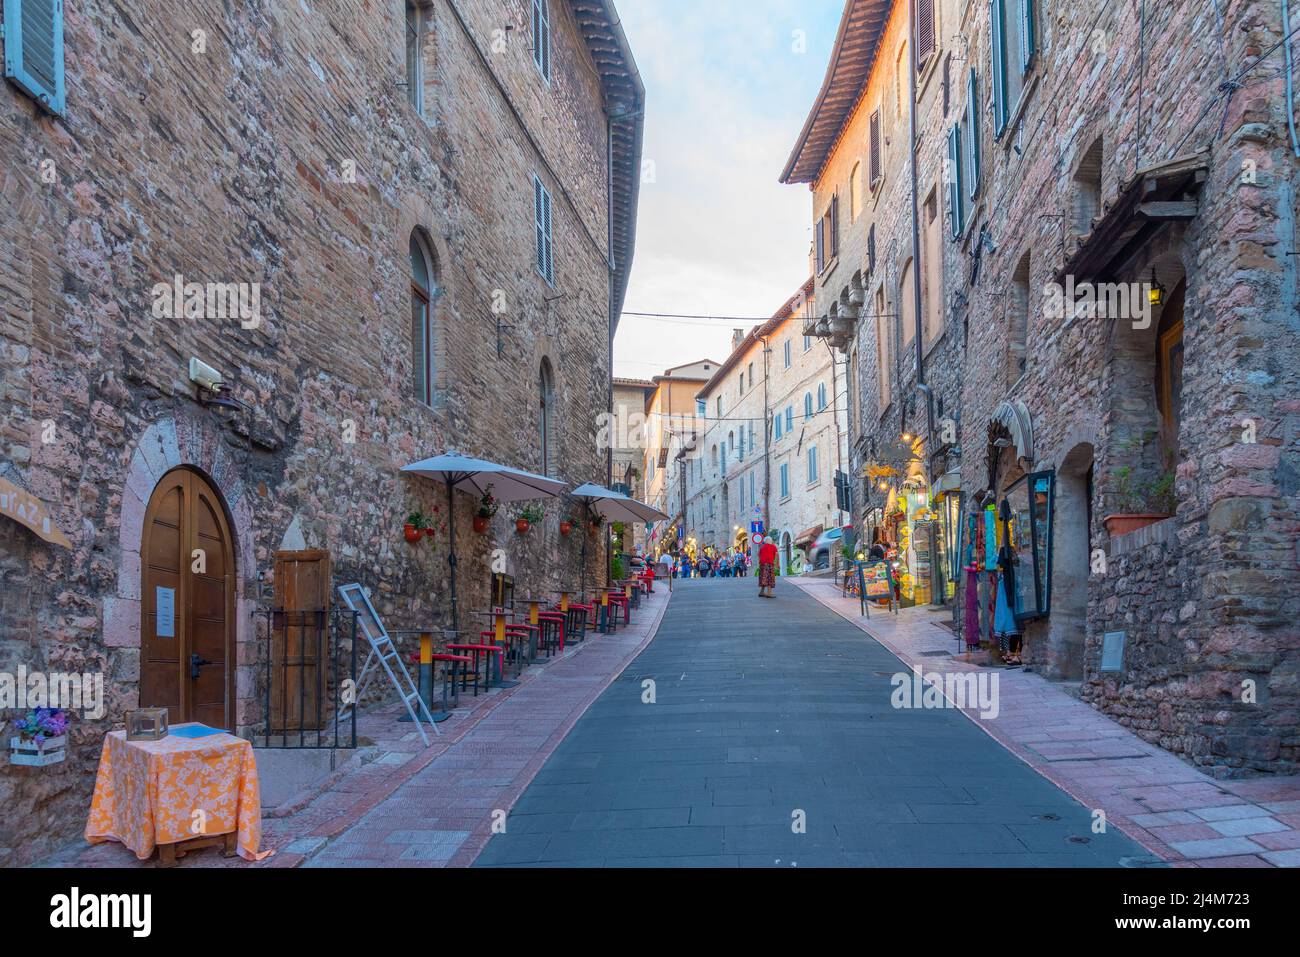 Assisi, Italy, October 2, 2021: Narrow street in the old town of Assisi in Italy. Stock Photo